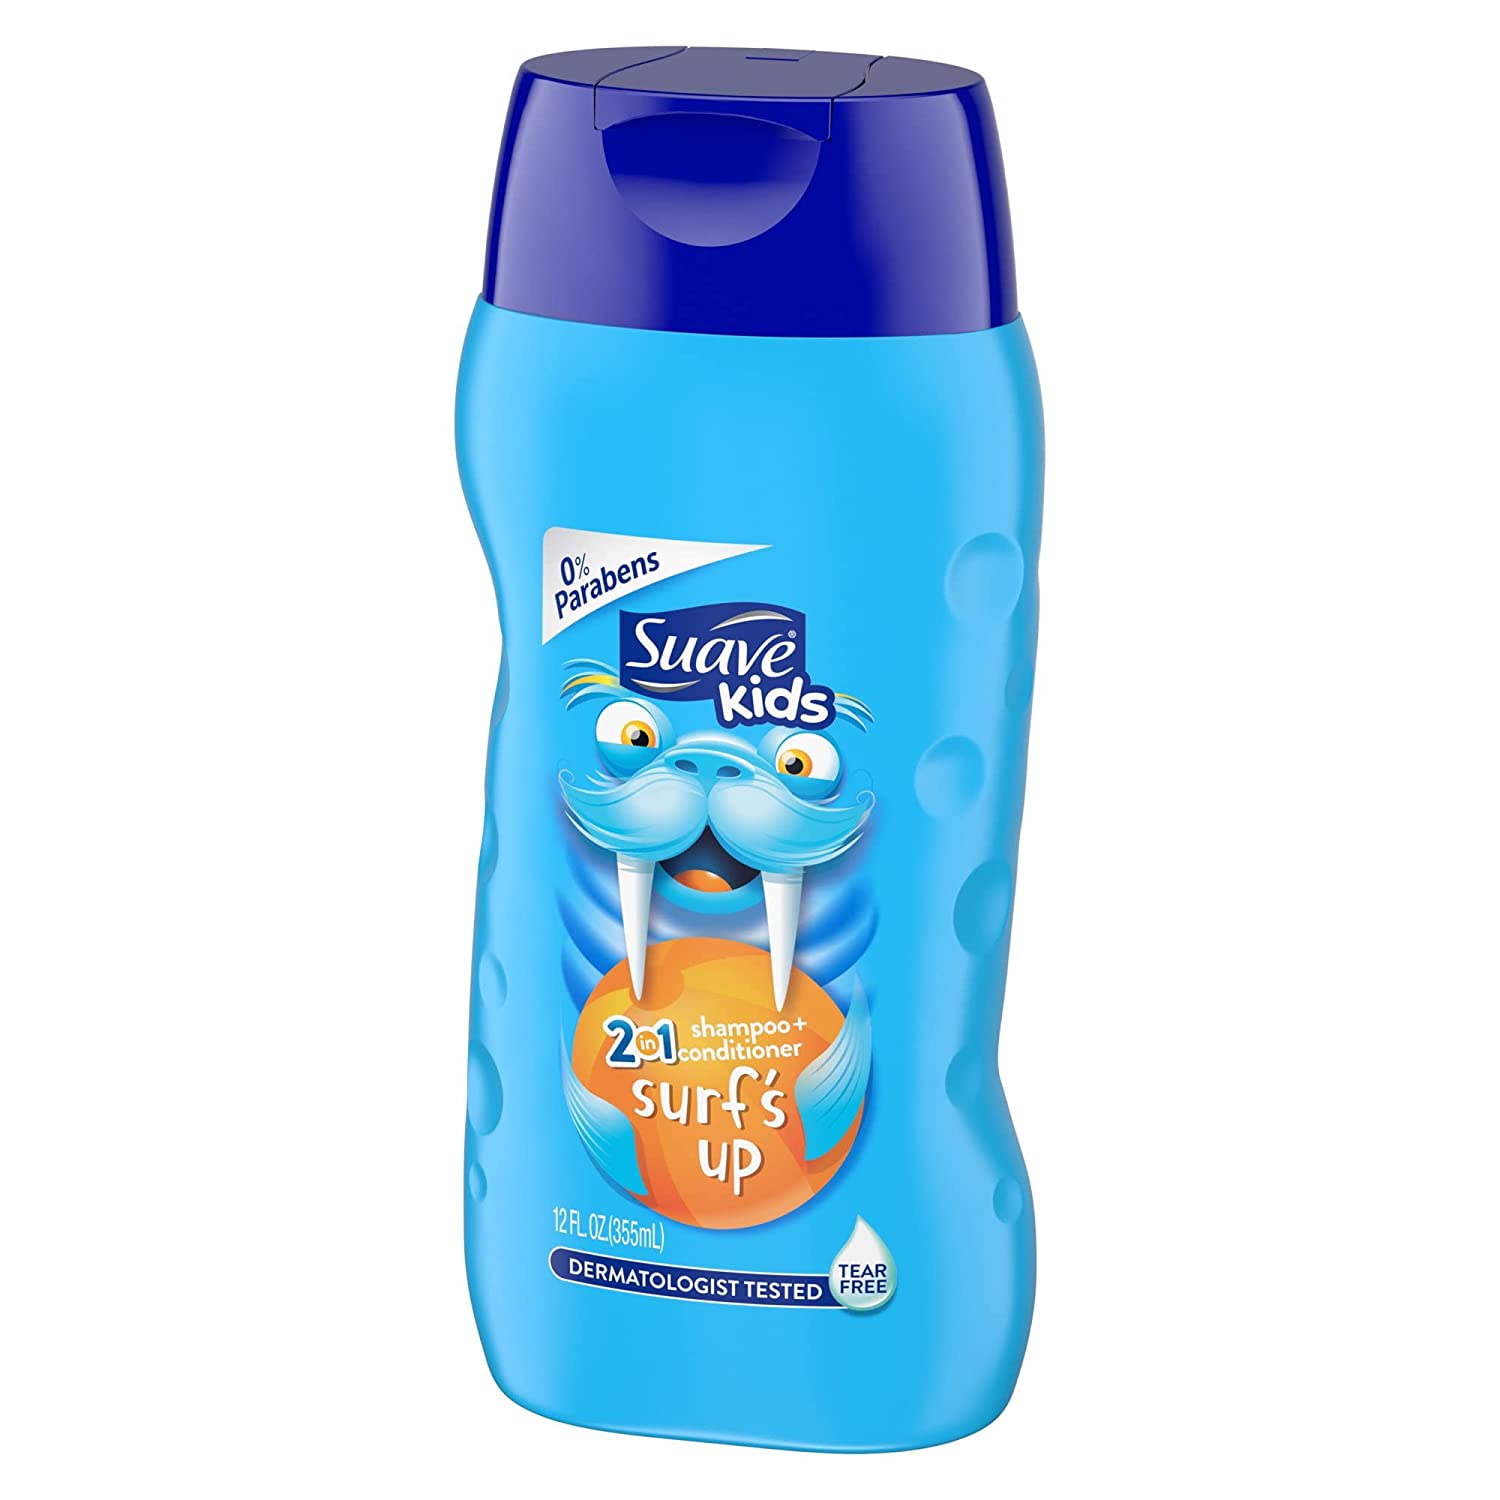 Suave Kids 2in1 Shampoo + Conditioner Surfs Up 355ml Blue - Baby Moo